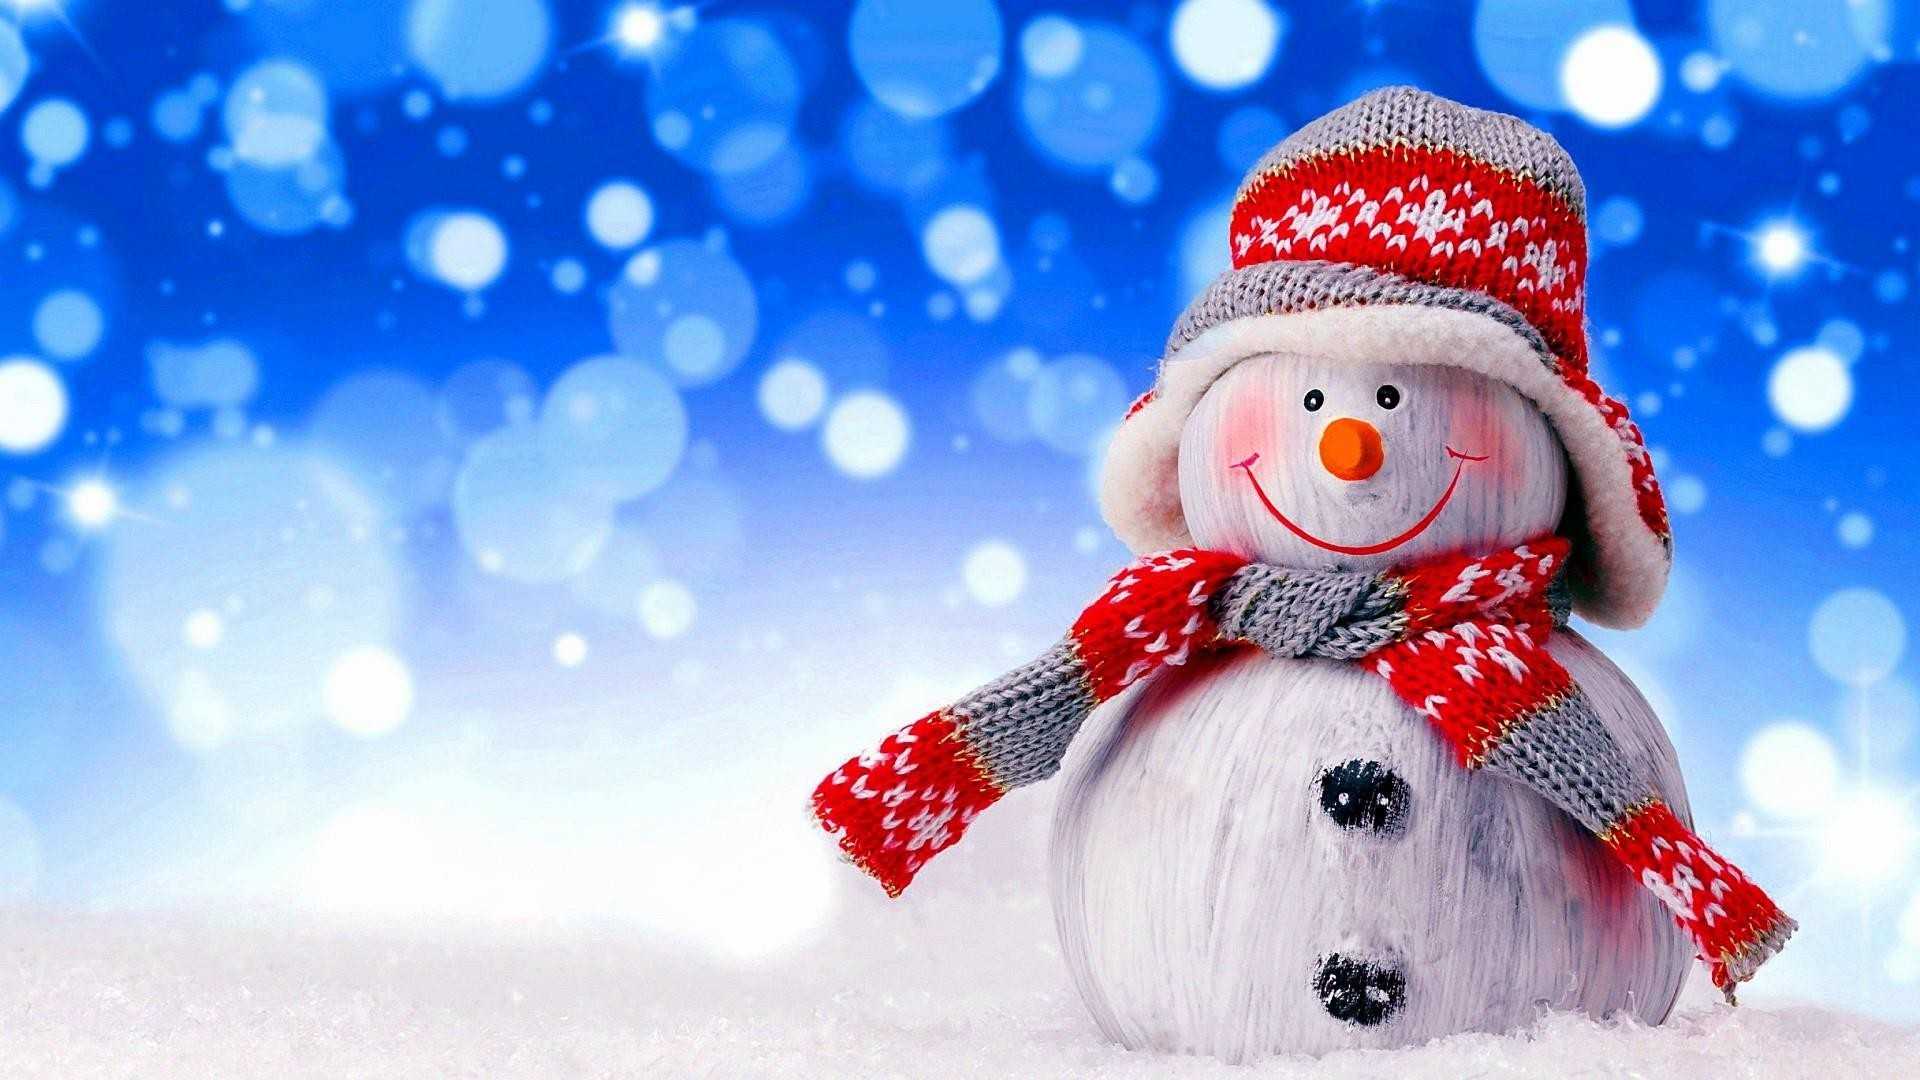 1,000+ Best Snowman Pictures for Free [HD] - Pixabay